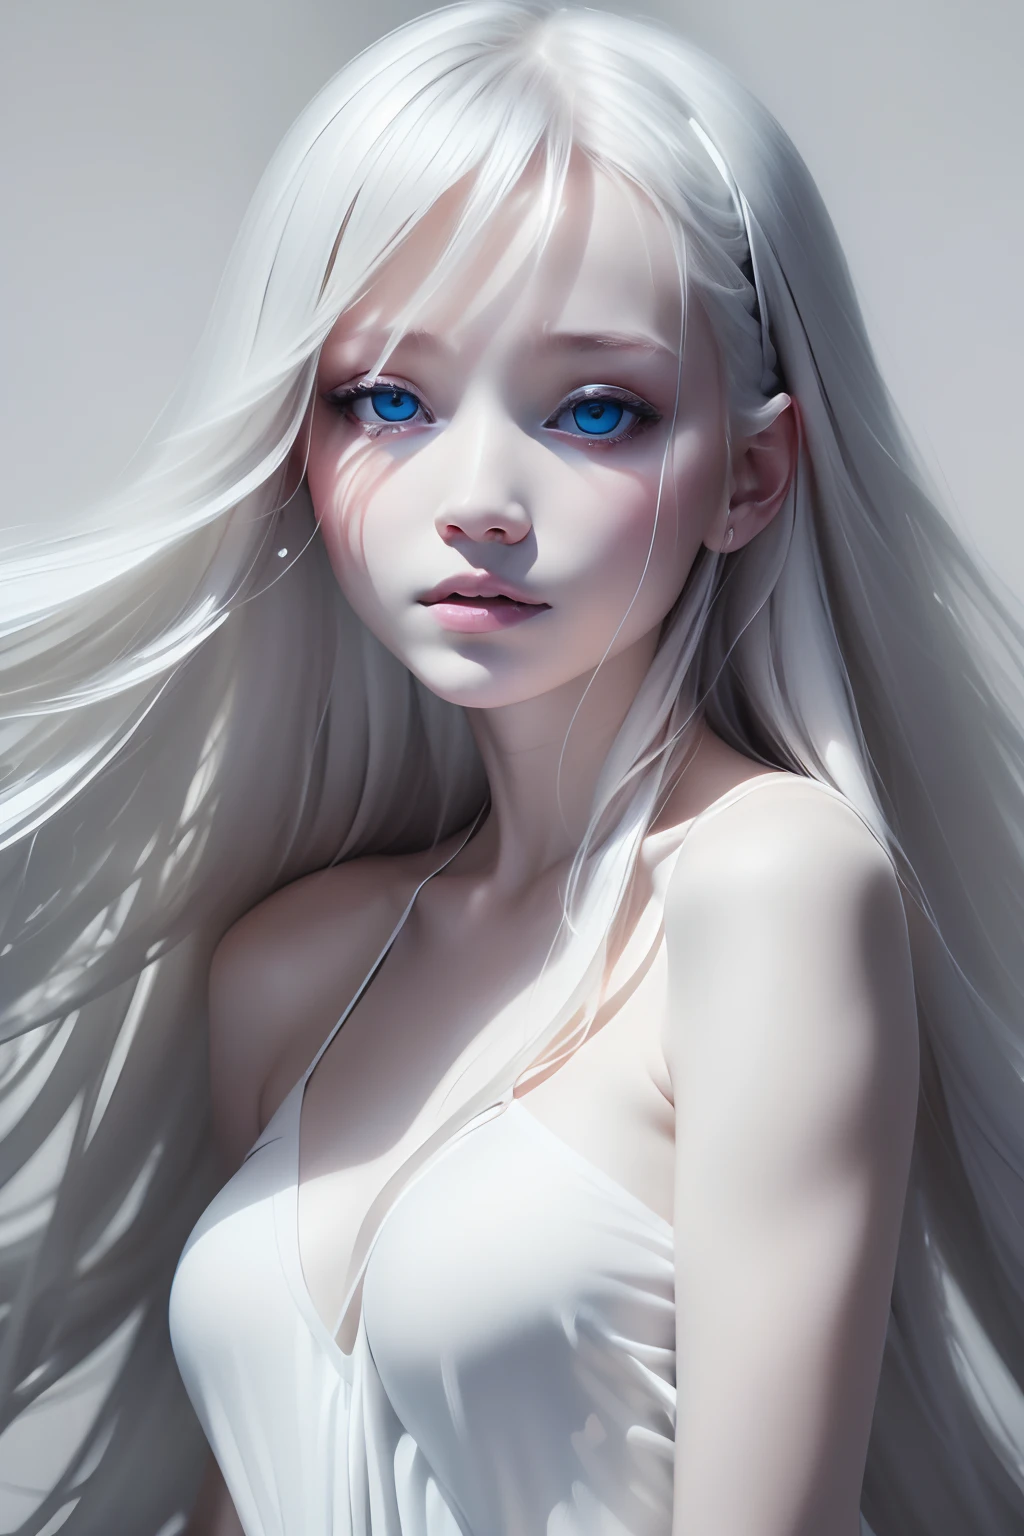 (((White background:1.3)))、Best Quality, masuter piece, High resolution, albino girl、(((1girl in))), sixteen years old,(((eyes are white:1.3)))、robe blanche、((White shirt:1.3、White Block Dress)), Tindall Effect, Realistic, Shadow Studio,Ultramarine Lighting, dual-tone lighting, (High Detail Skins: 1.2)、Pale colored lighting、Dark lighting、 Digital SLR, Photo, High resolution, 4K, 8K, Background blur,Fade out beautifully、a white world、White background